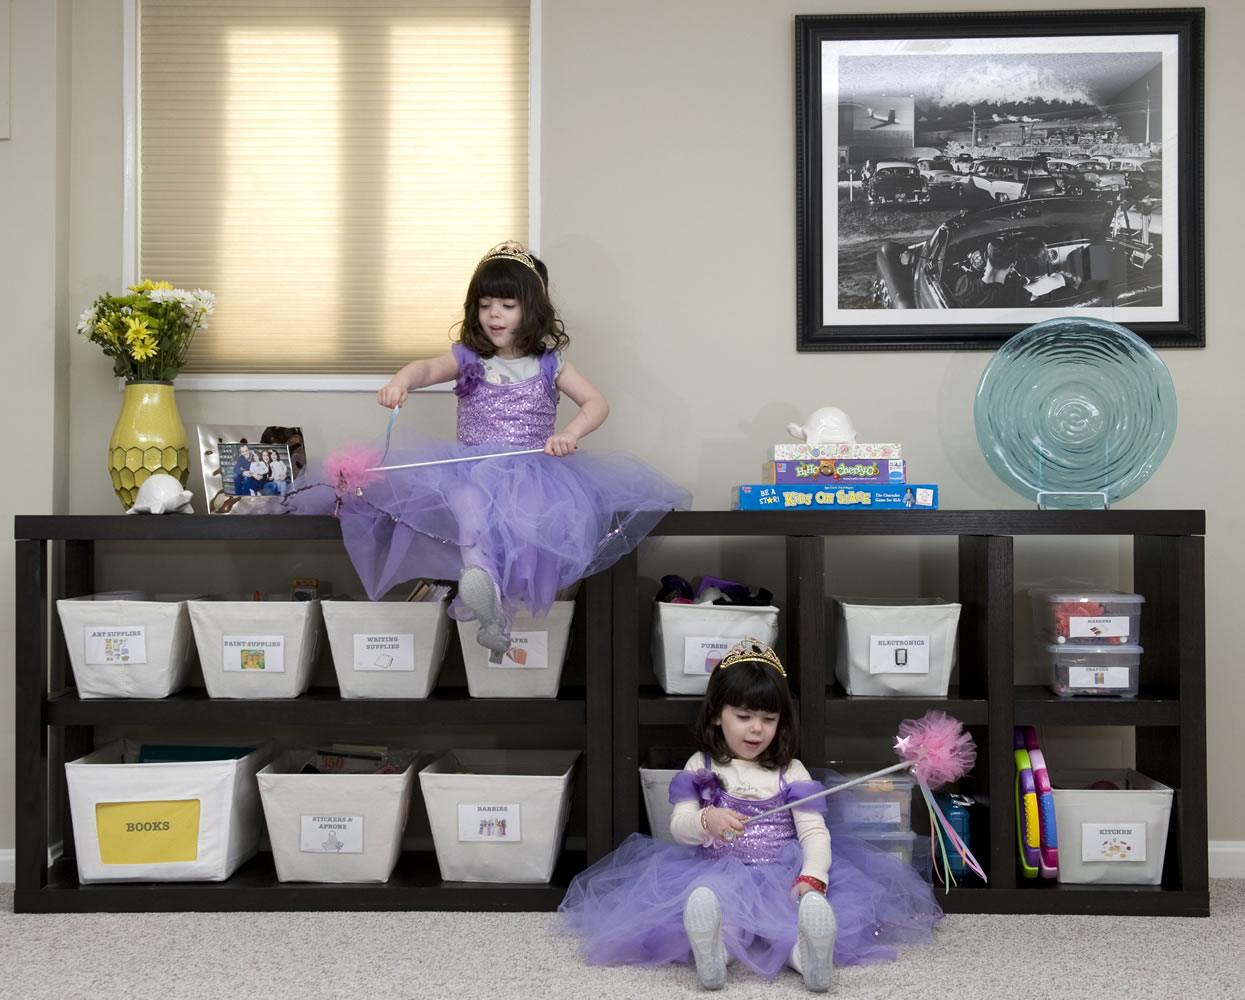 Professional organizer Rachel Strisik's 4-year-old twins Marin, left, and Ellie play dress-up in their playroom of their Bethesda, Md., home.